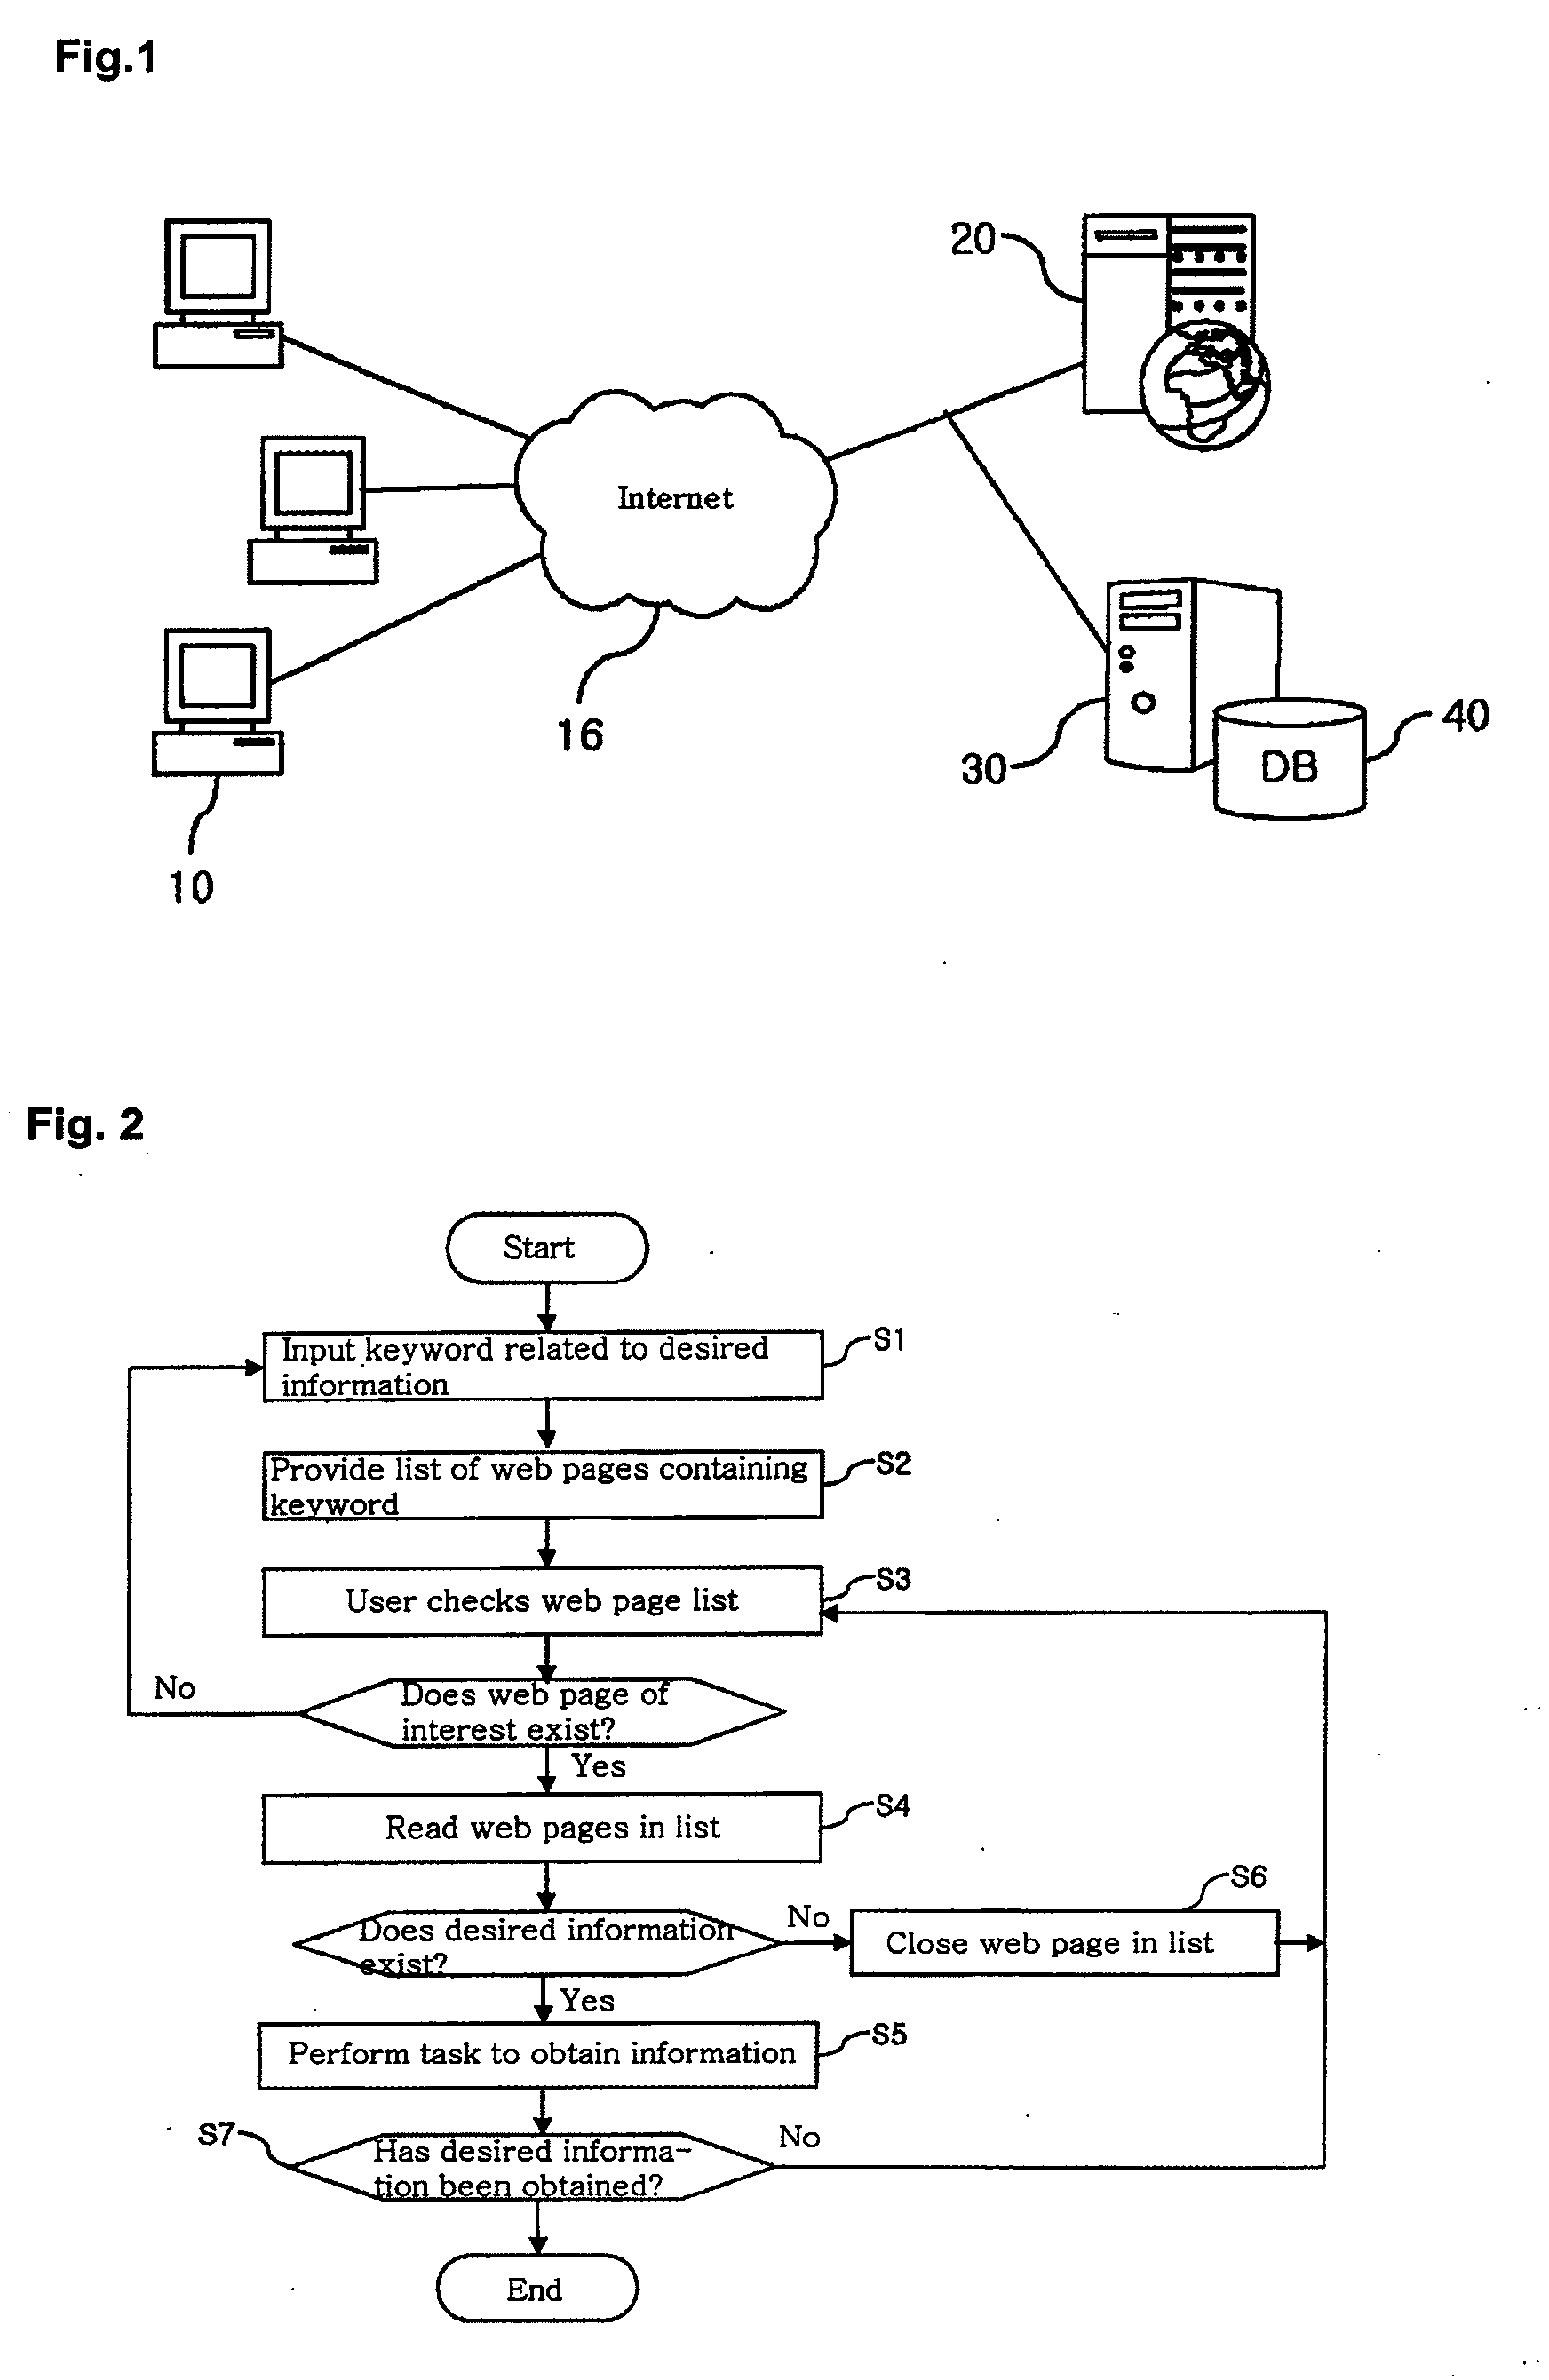 System and Method for Building Multi-Concept Network Based on User's Web Usage Data